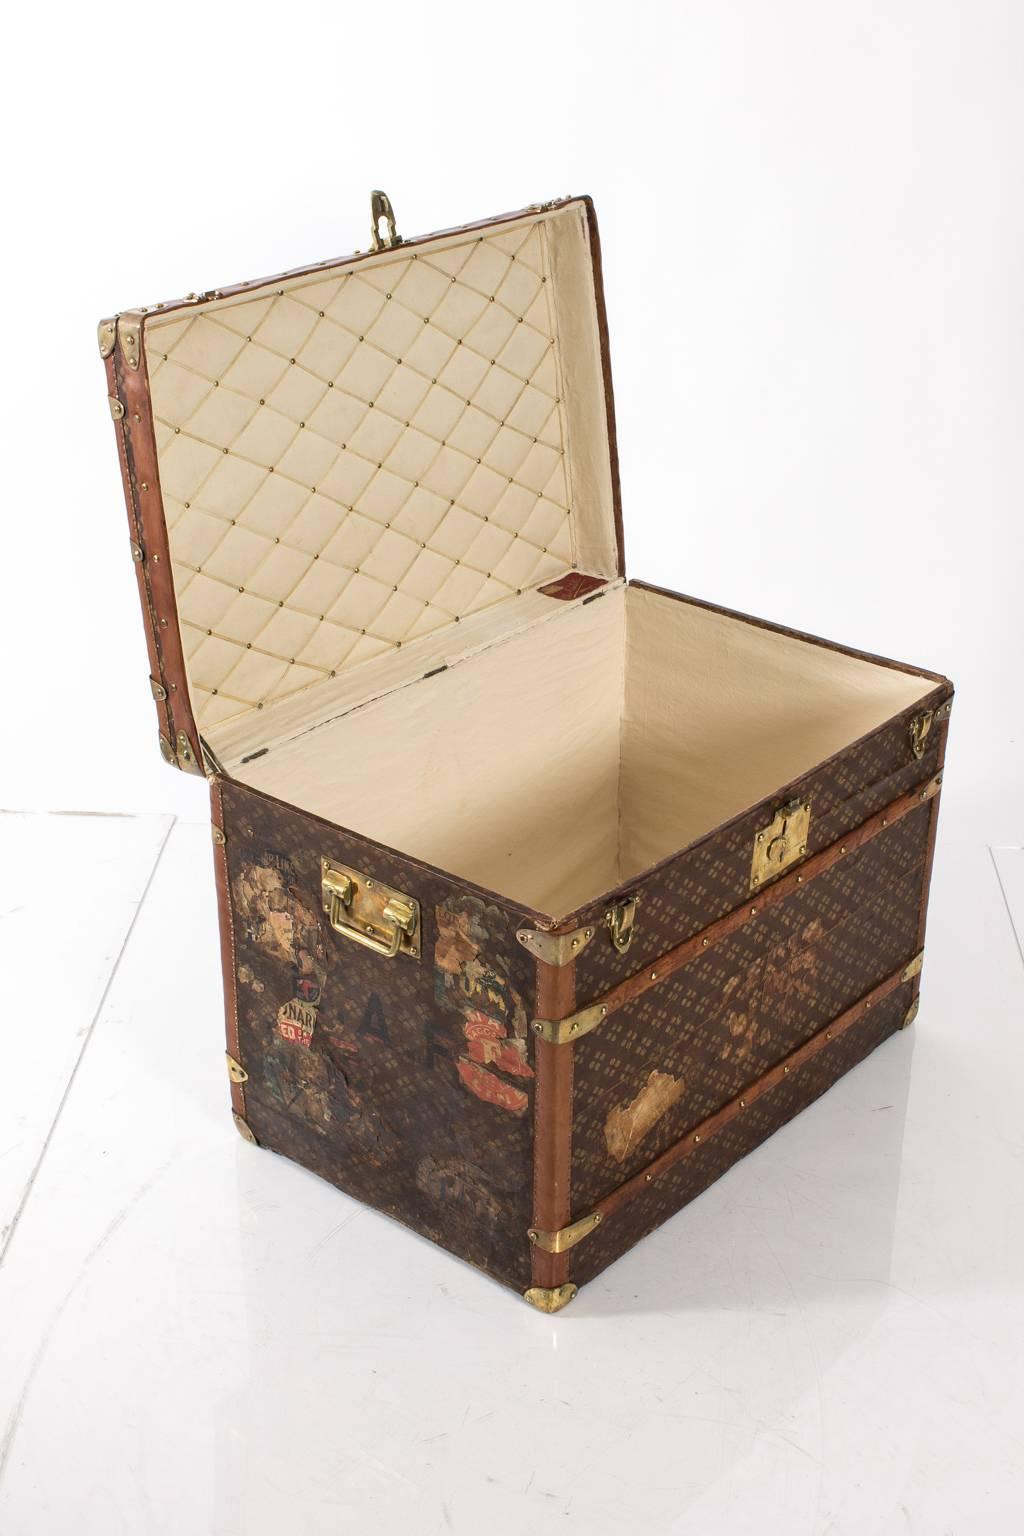 1920s Steamer Trunk In Fair Condition For Sale In Stamford, CT